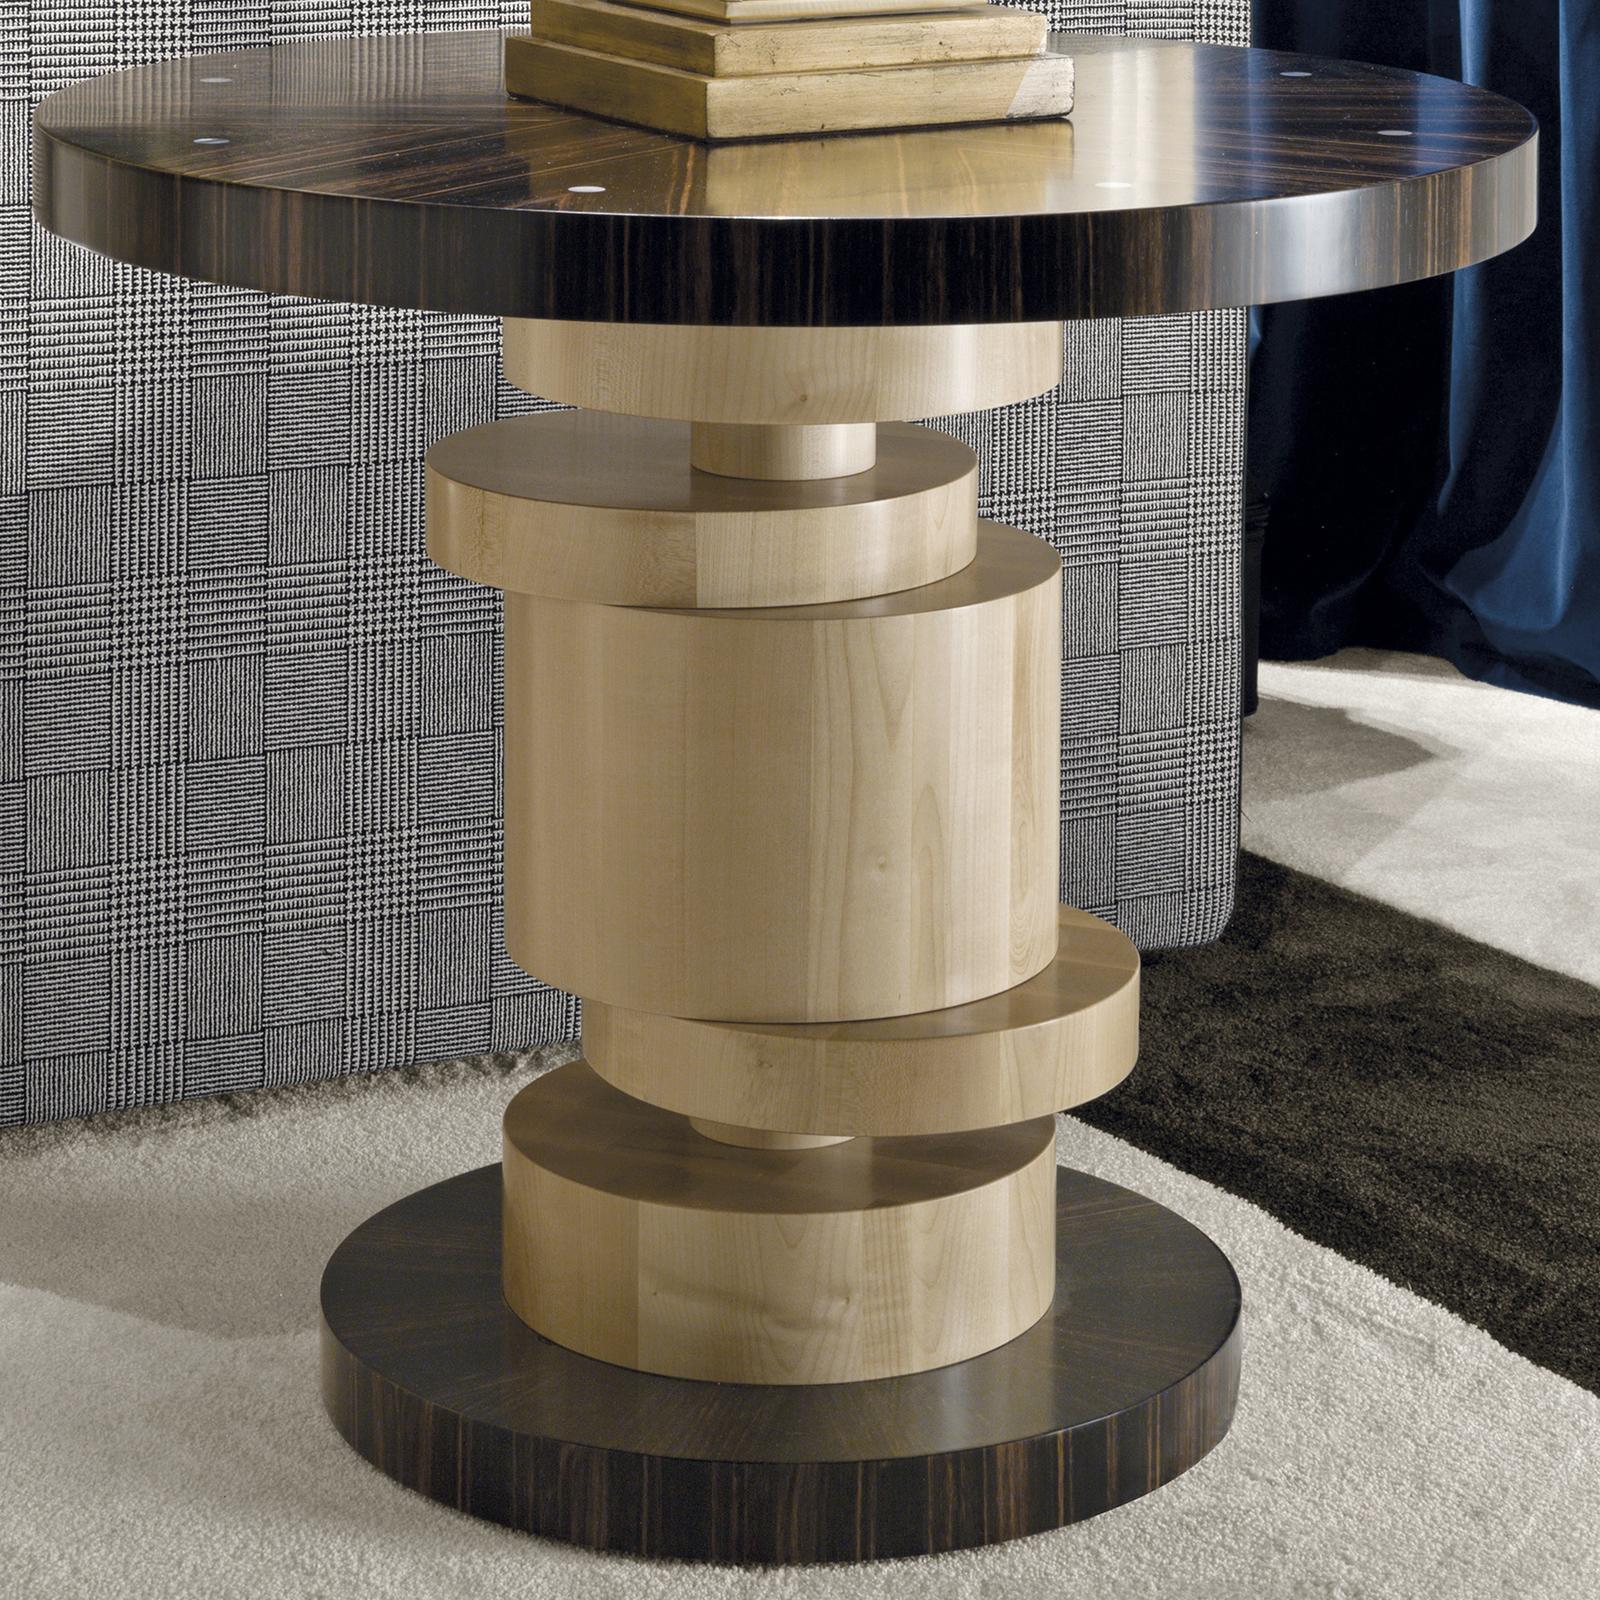 Creating a unique impression of movement, the structure of this exquisite side table will make a statement in a contemporary living room. The round base and top in mahogany strikingly contrast with the honey-colored maple of the vertical structure,